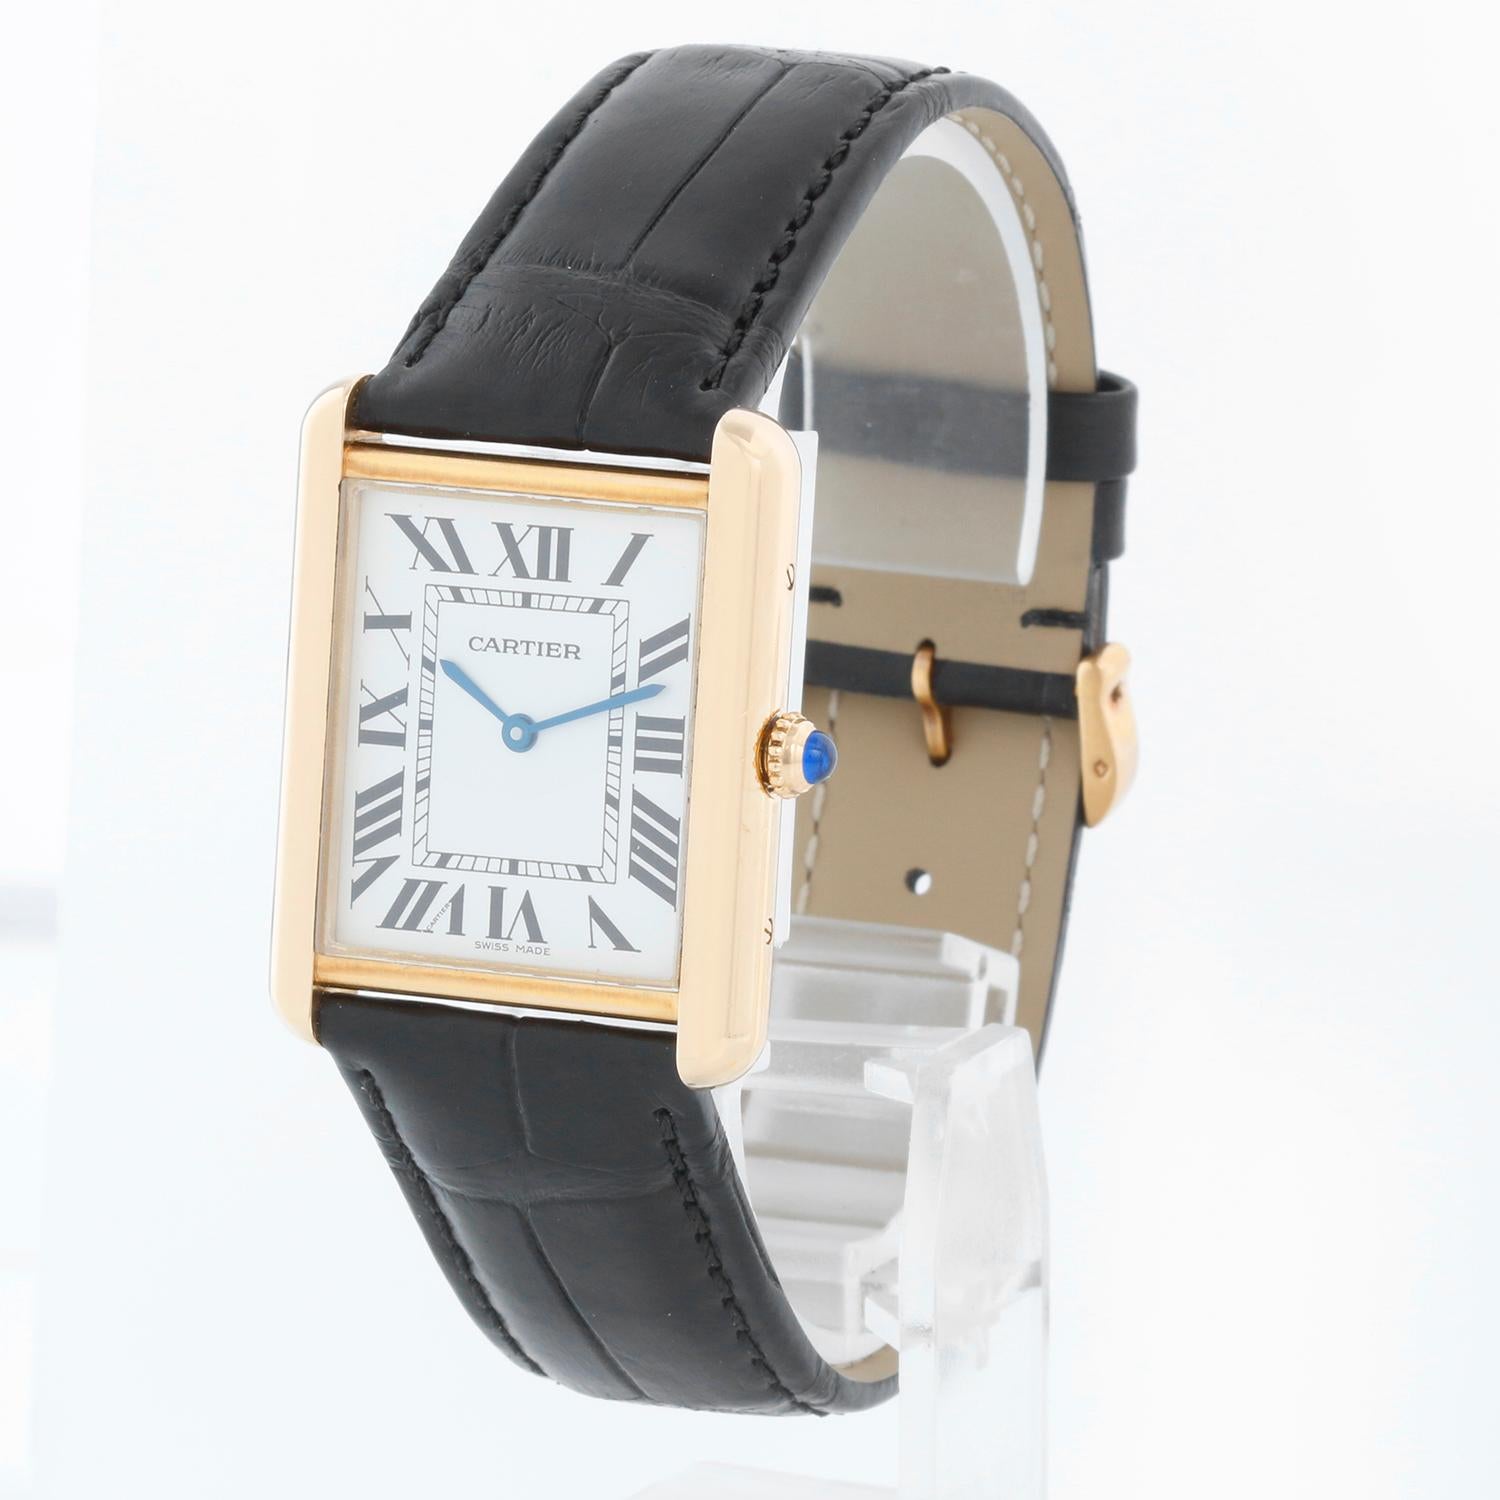 Cartier Tank Solo 18K Yellow Gold Men's Watch W1018855 2742 - Quartz movement. 18k yellow gold case with stainless steel back (27mm x 34mm). Silver colored dial with black Roman numerals. New Black Cartier strap band with 18k yellow gold Cartier